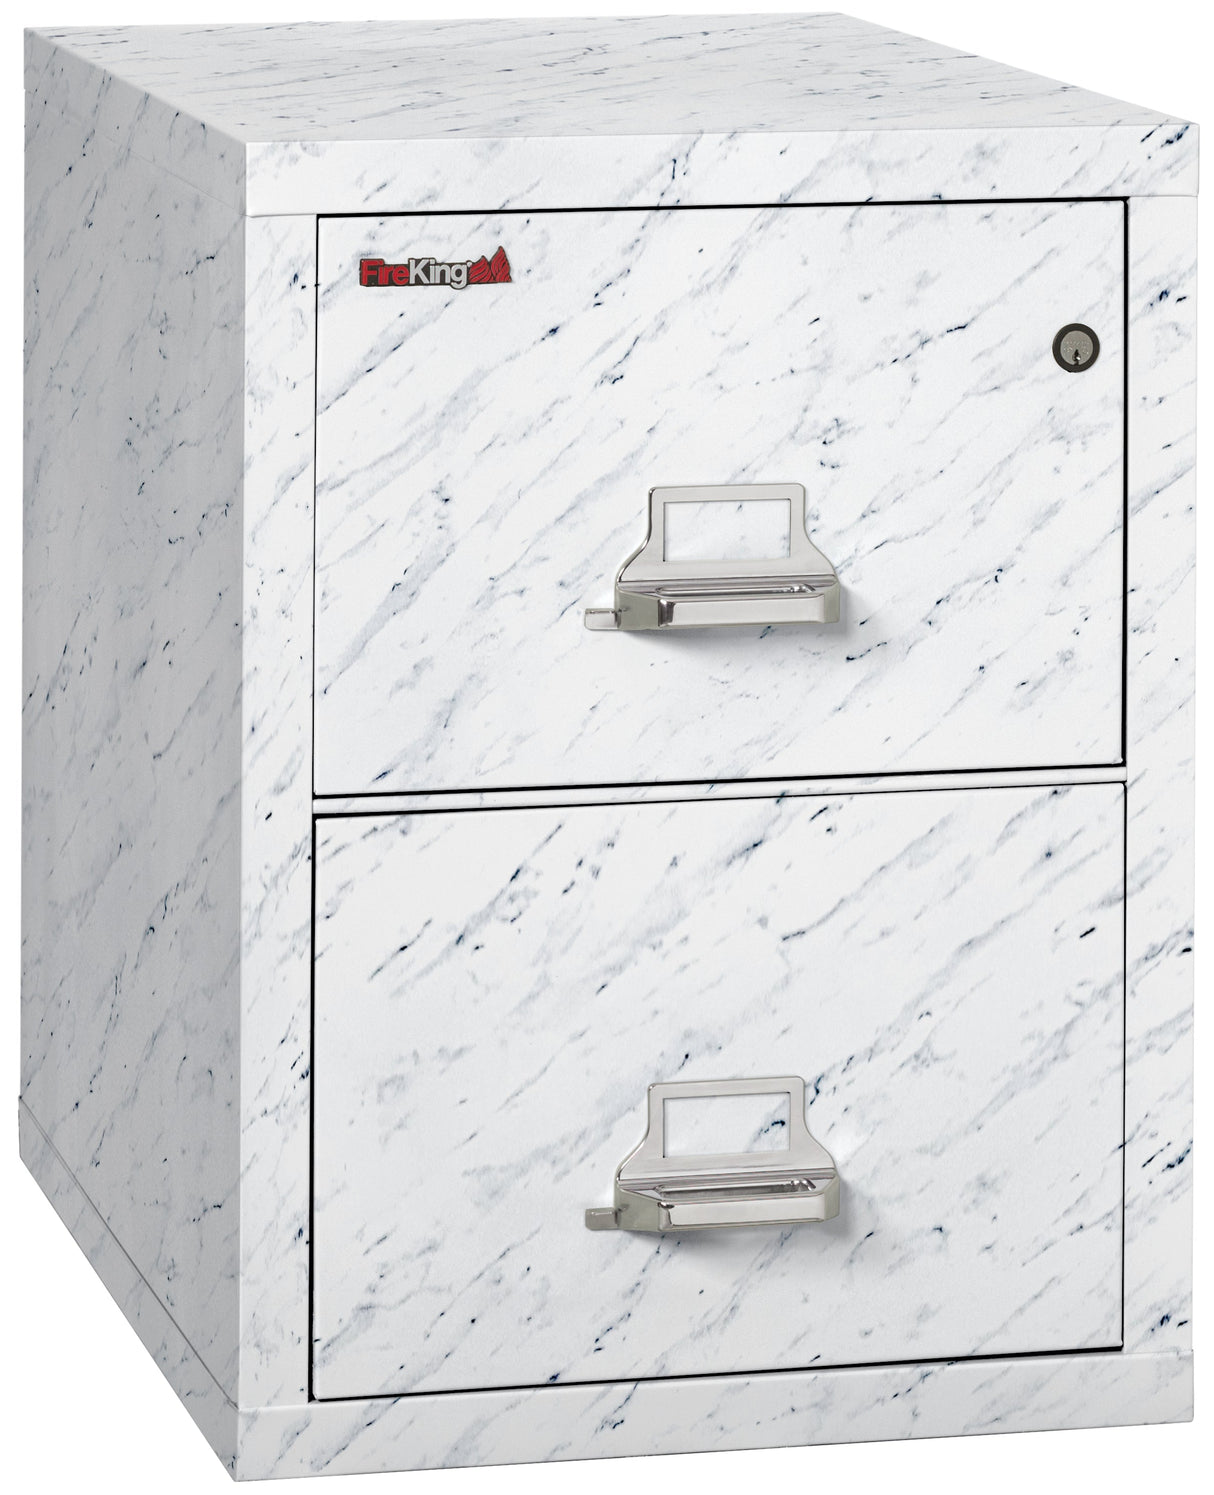 FireKing Designer Series 25" Vertical File Cabinet (1-Hour Fire-Rated & High Security)